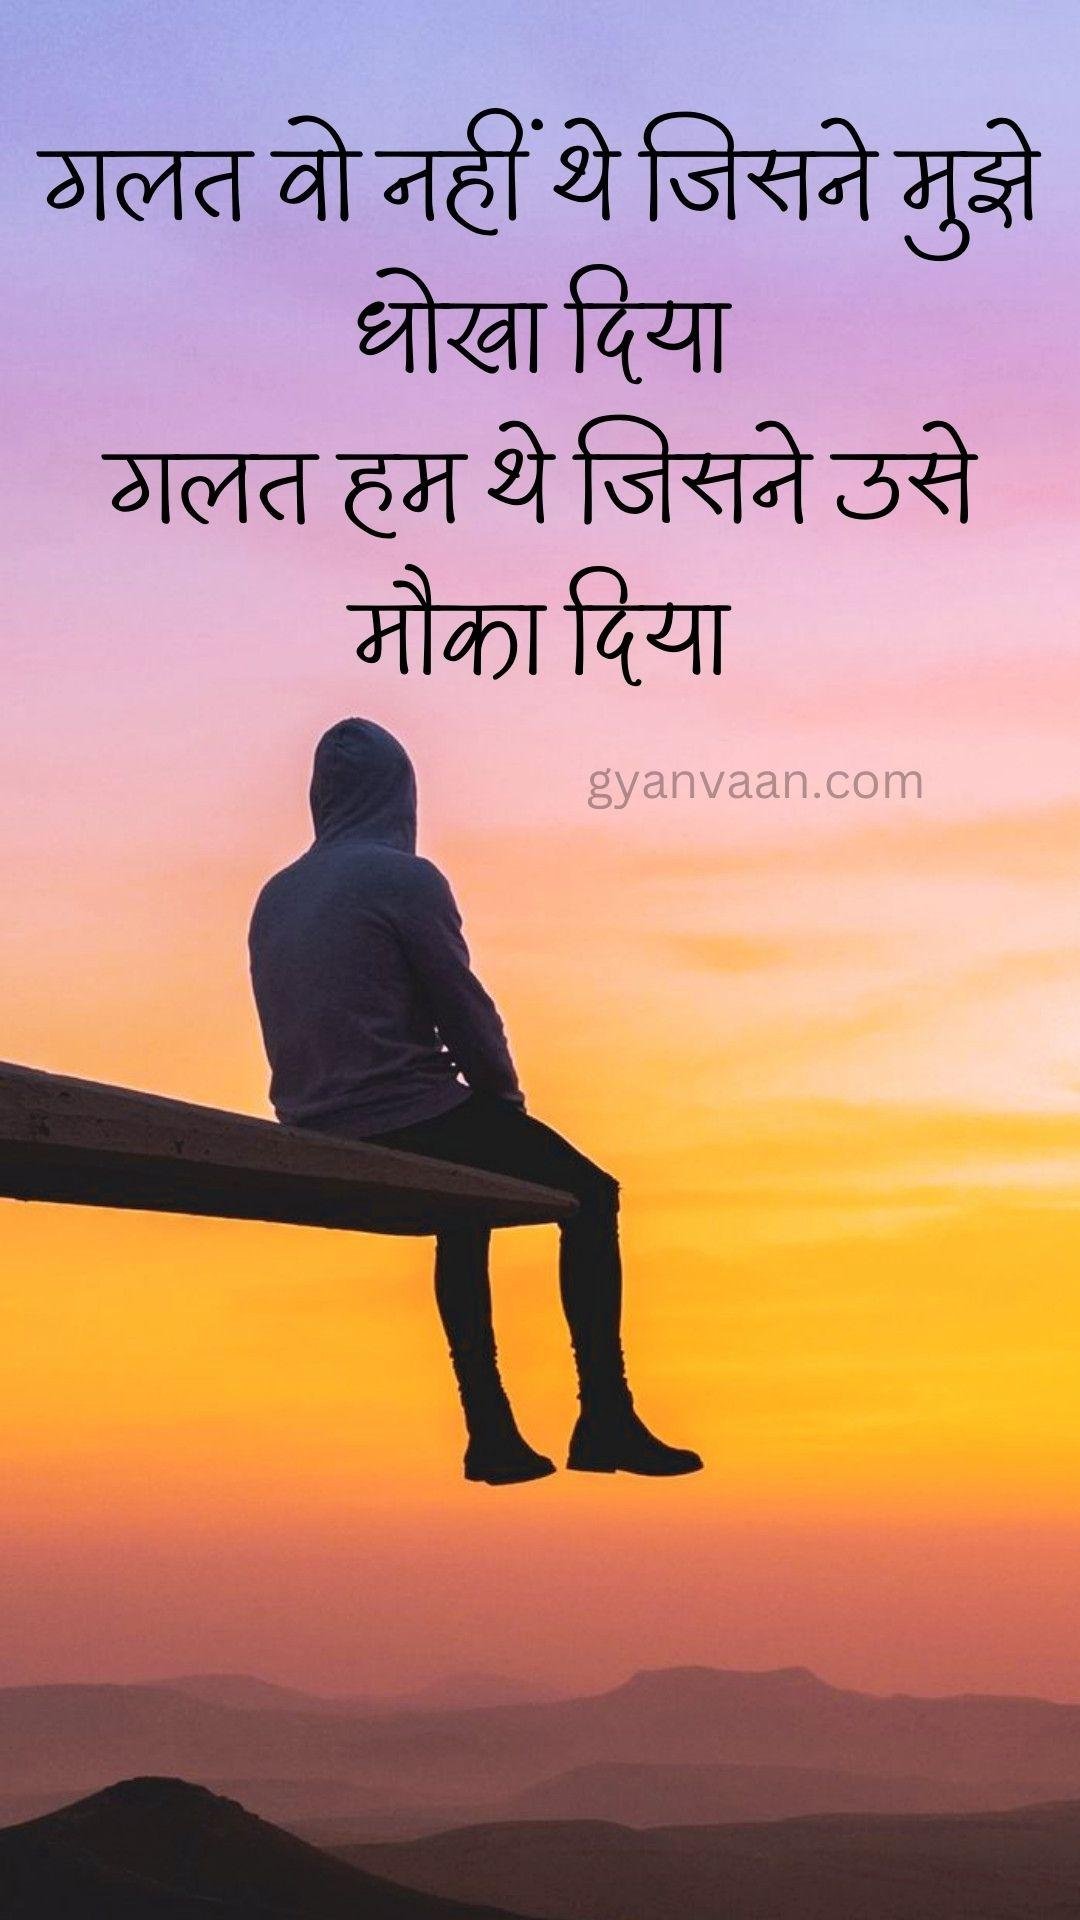 Very Heart Touching Sad Quotes In Hindi For Mobile Devices 1 - Very Heart Touching Sad Quotes In Hindi